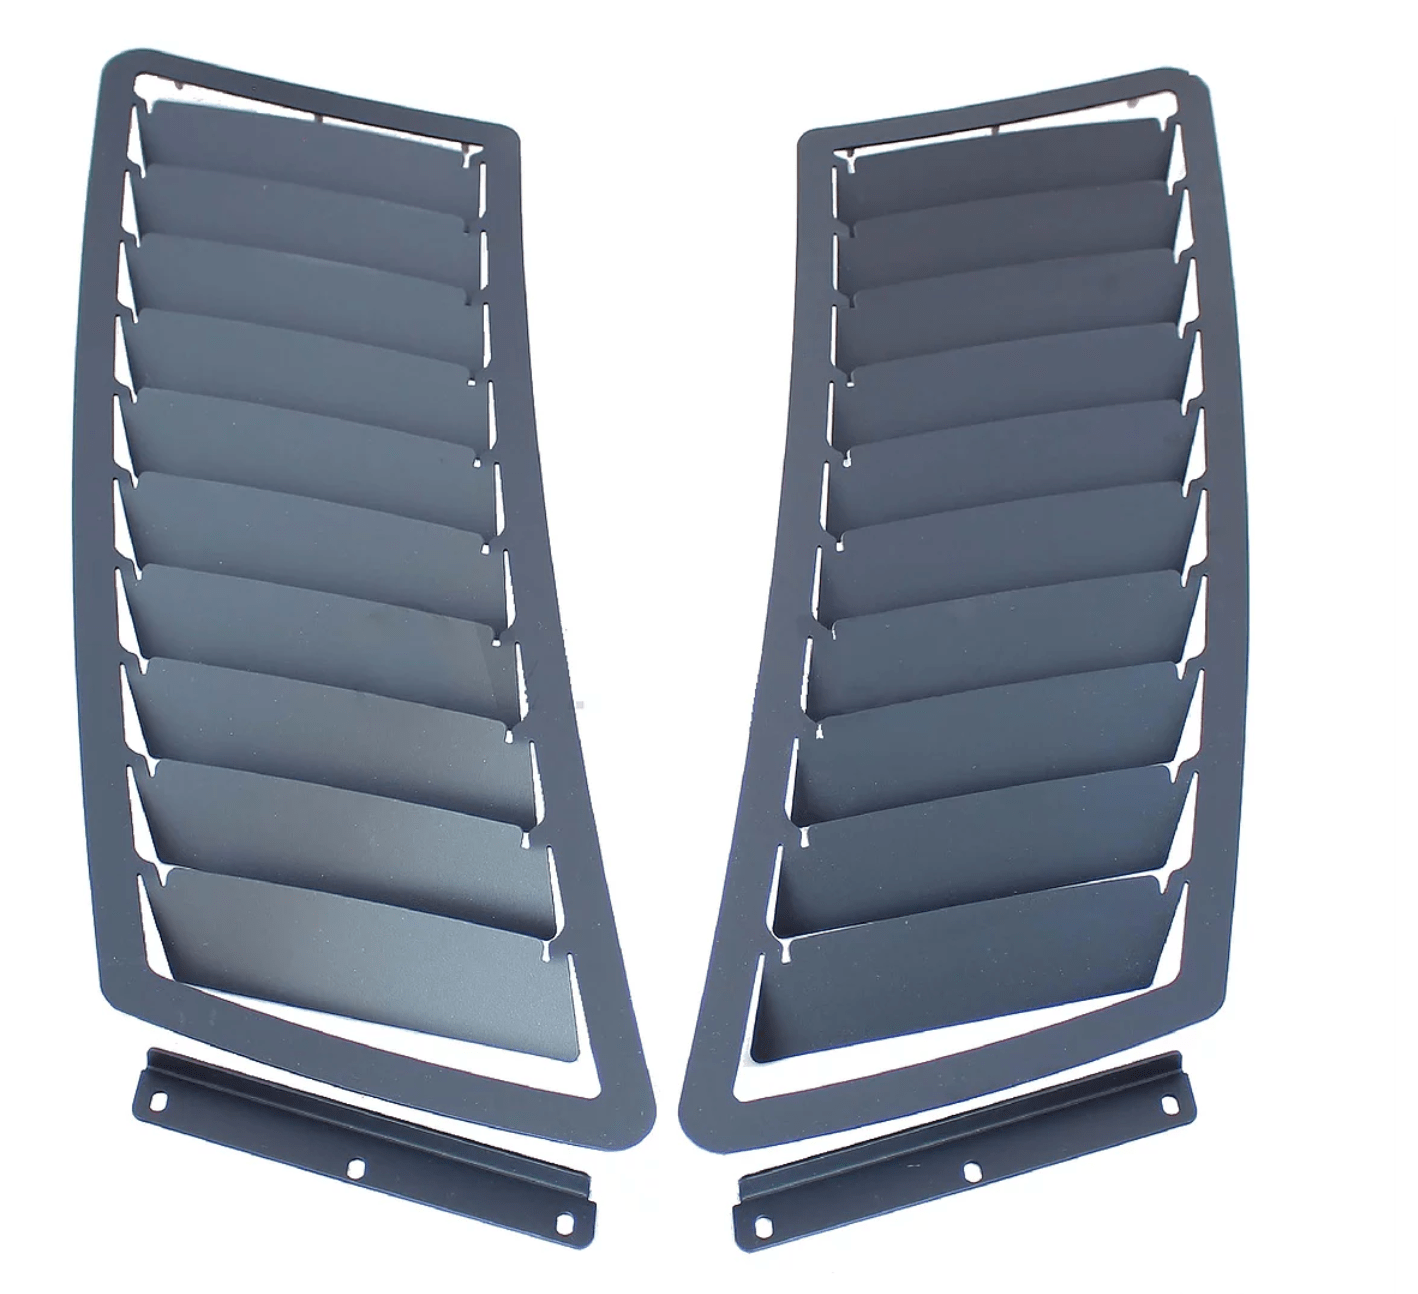 Ford Mustang Verus Engineering Hood Louver Kit (For GT)